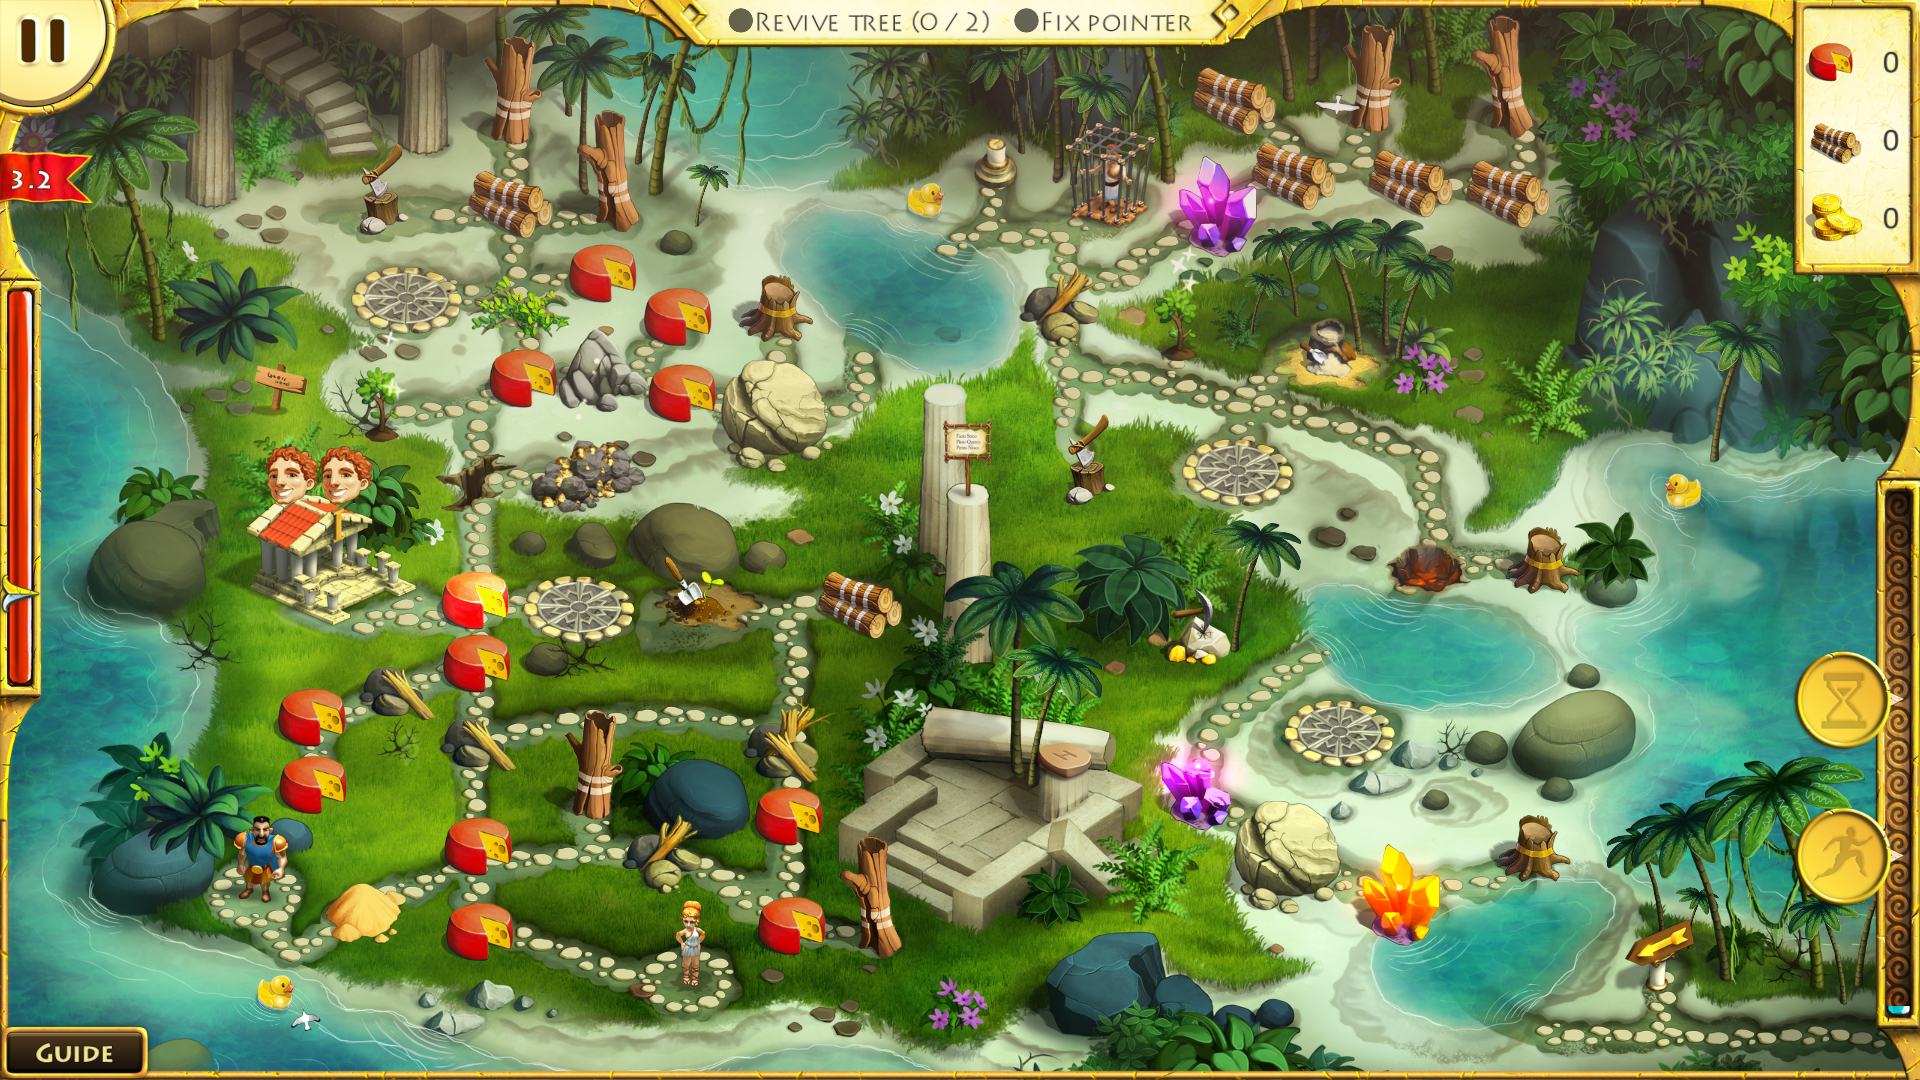 12 labours of hercules game